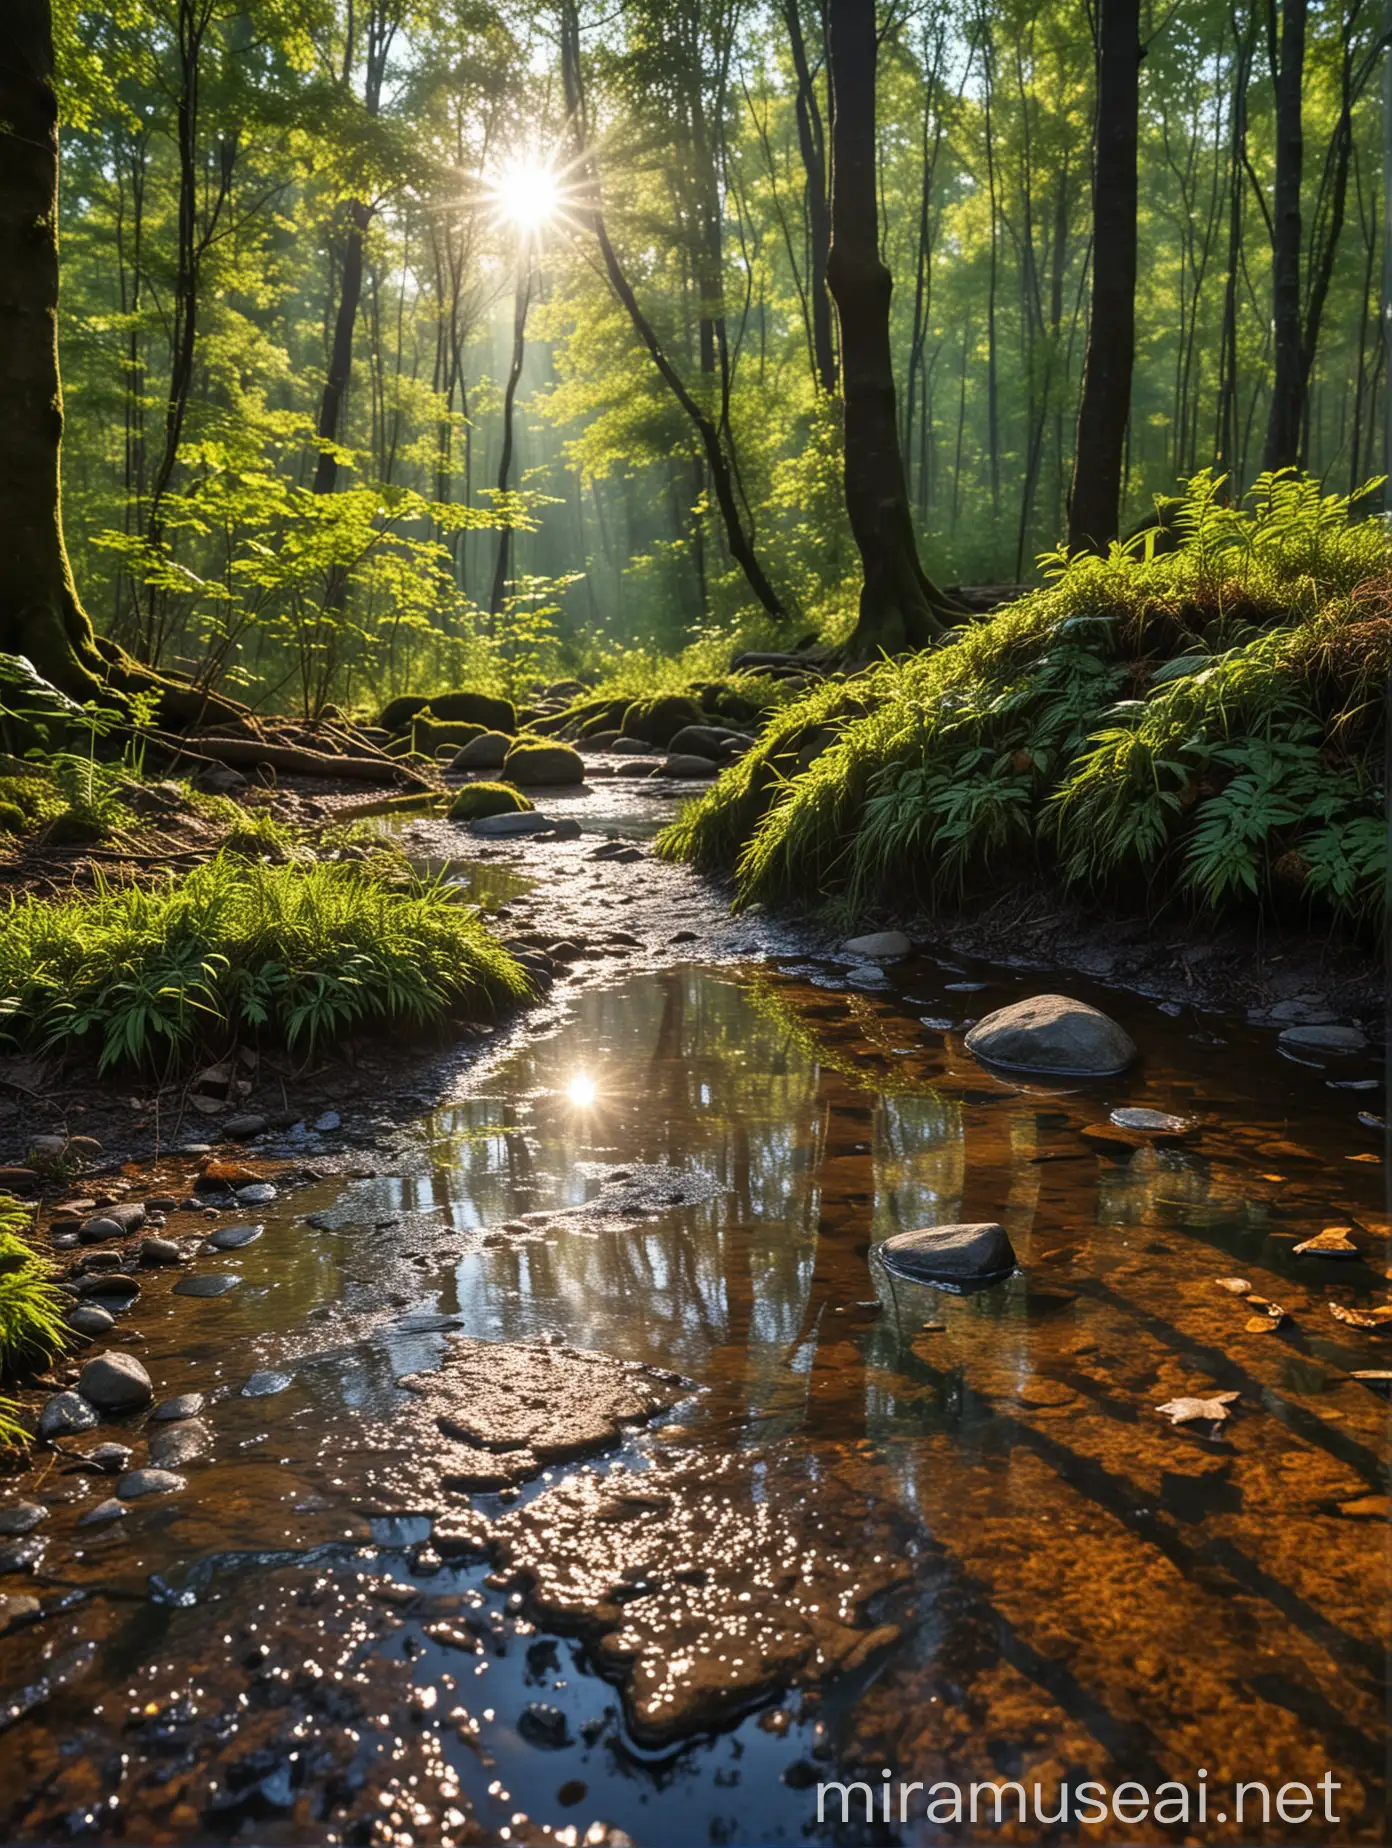 After the rain, in the forest thicket, in the foreground a small puddle, and in the puddle a flat stone, and splashes around the stone. Noon, the sun is high and its rays penetrate through the canopy of trees.